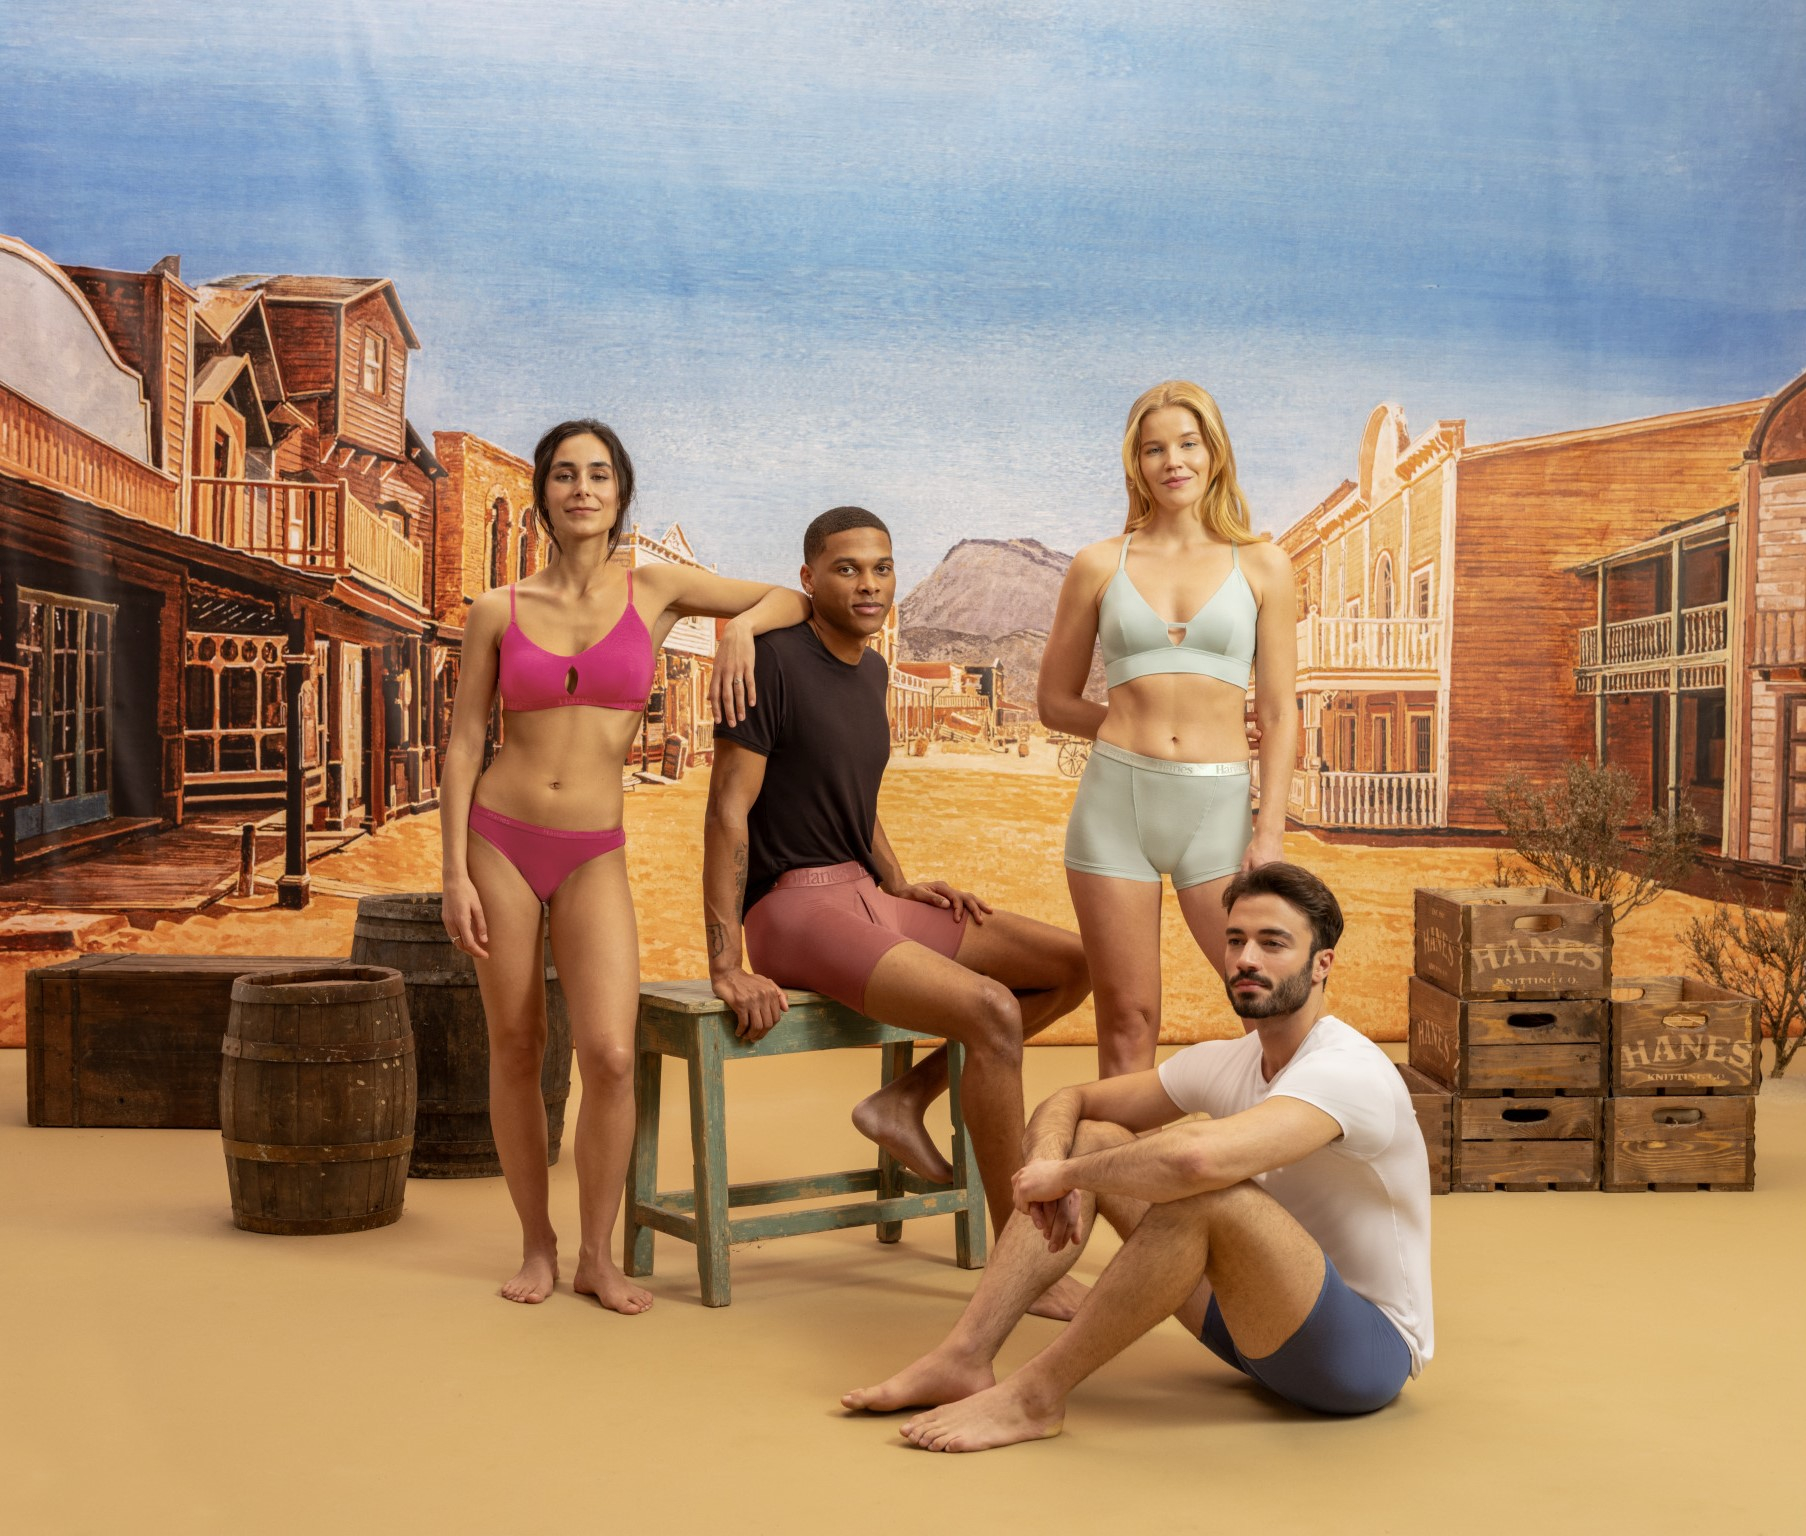 Online Underwear Brands Are Using Comfort, Innovation and Great